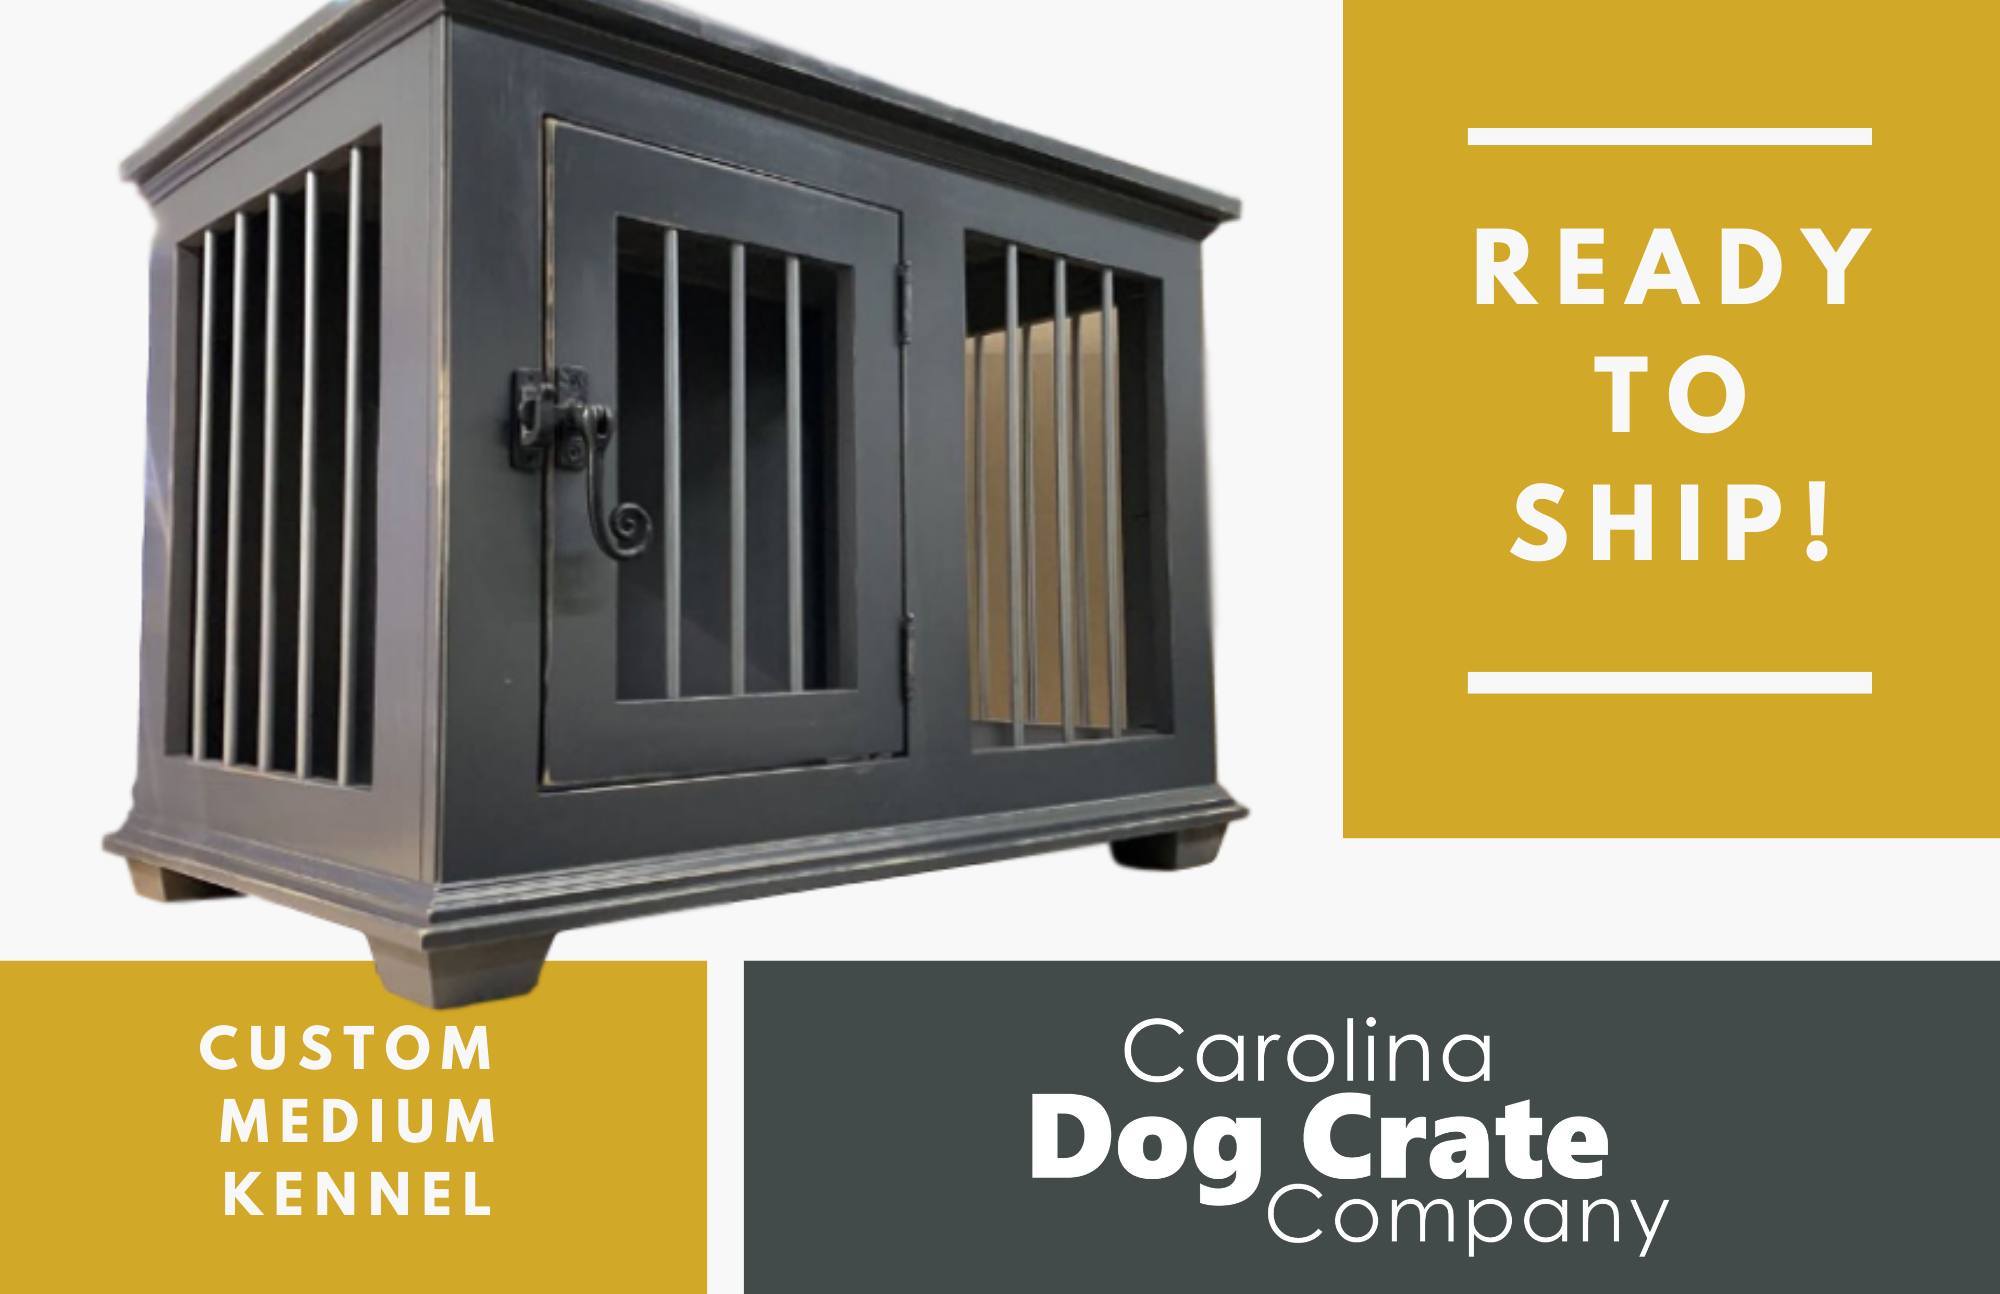 In-Stock Custom Medium Dog Crate Kennel End Table - Carolina Dog Crate Co.